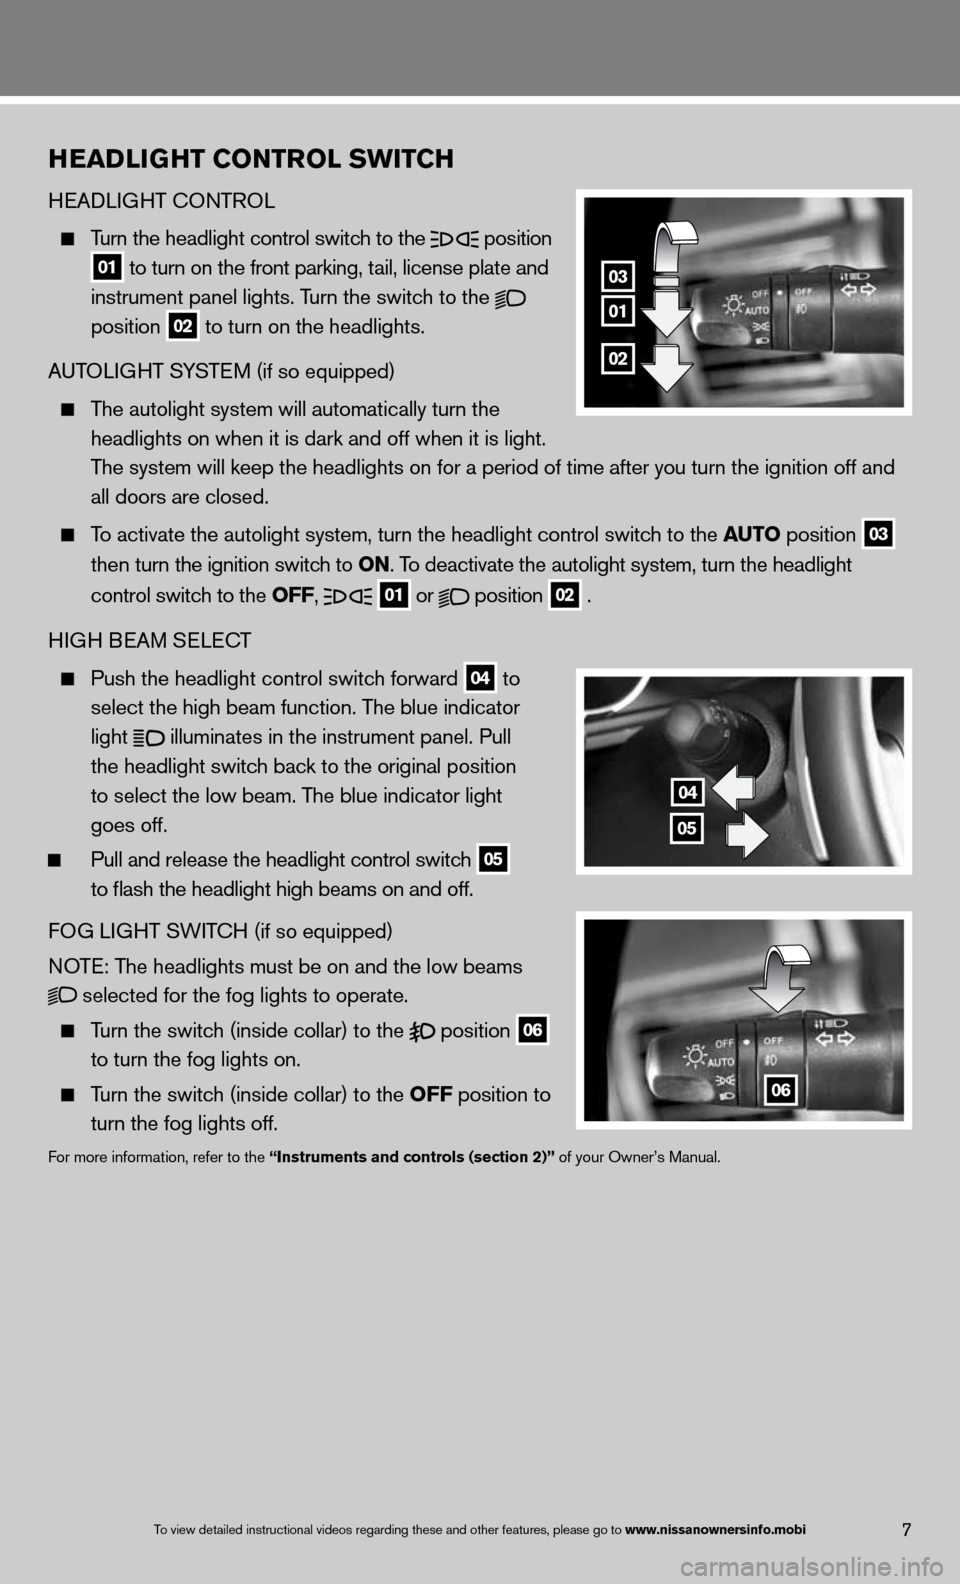 NISSAN TITAN 2013 1.G Quick Reference Guide 01
03
02
hEADLIG hT CONTROL SWITCh 
H eAd LiGHT c OnTROL  
 
  Turn the headlight control switch to the
  position
 
  01  to turn on the front parking, tail, license plate and 
 
    instrument panel